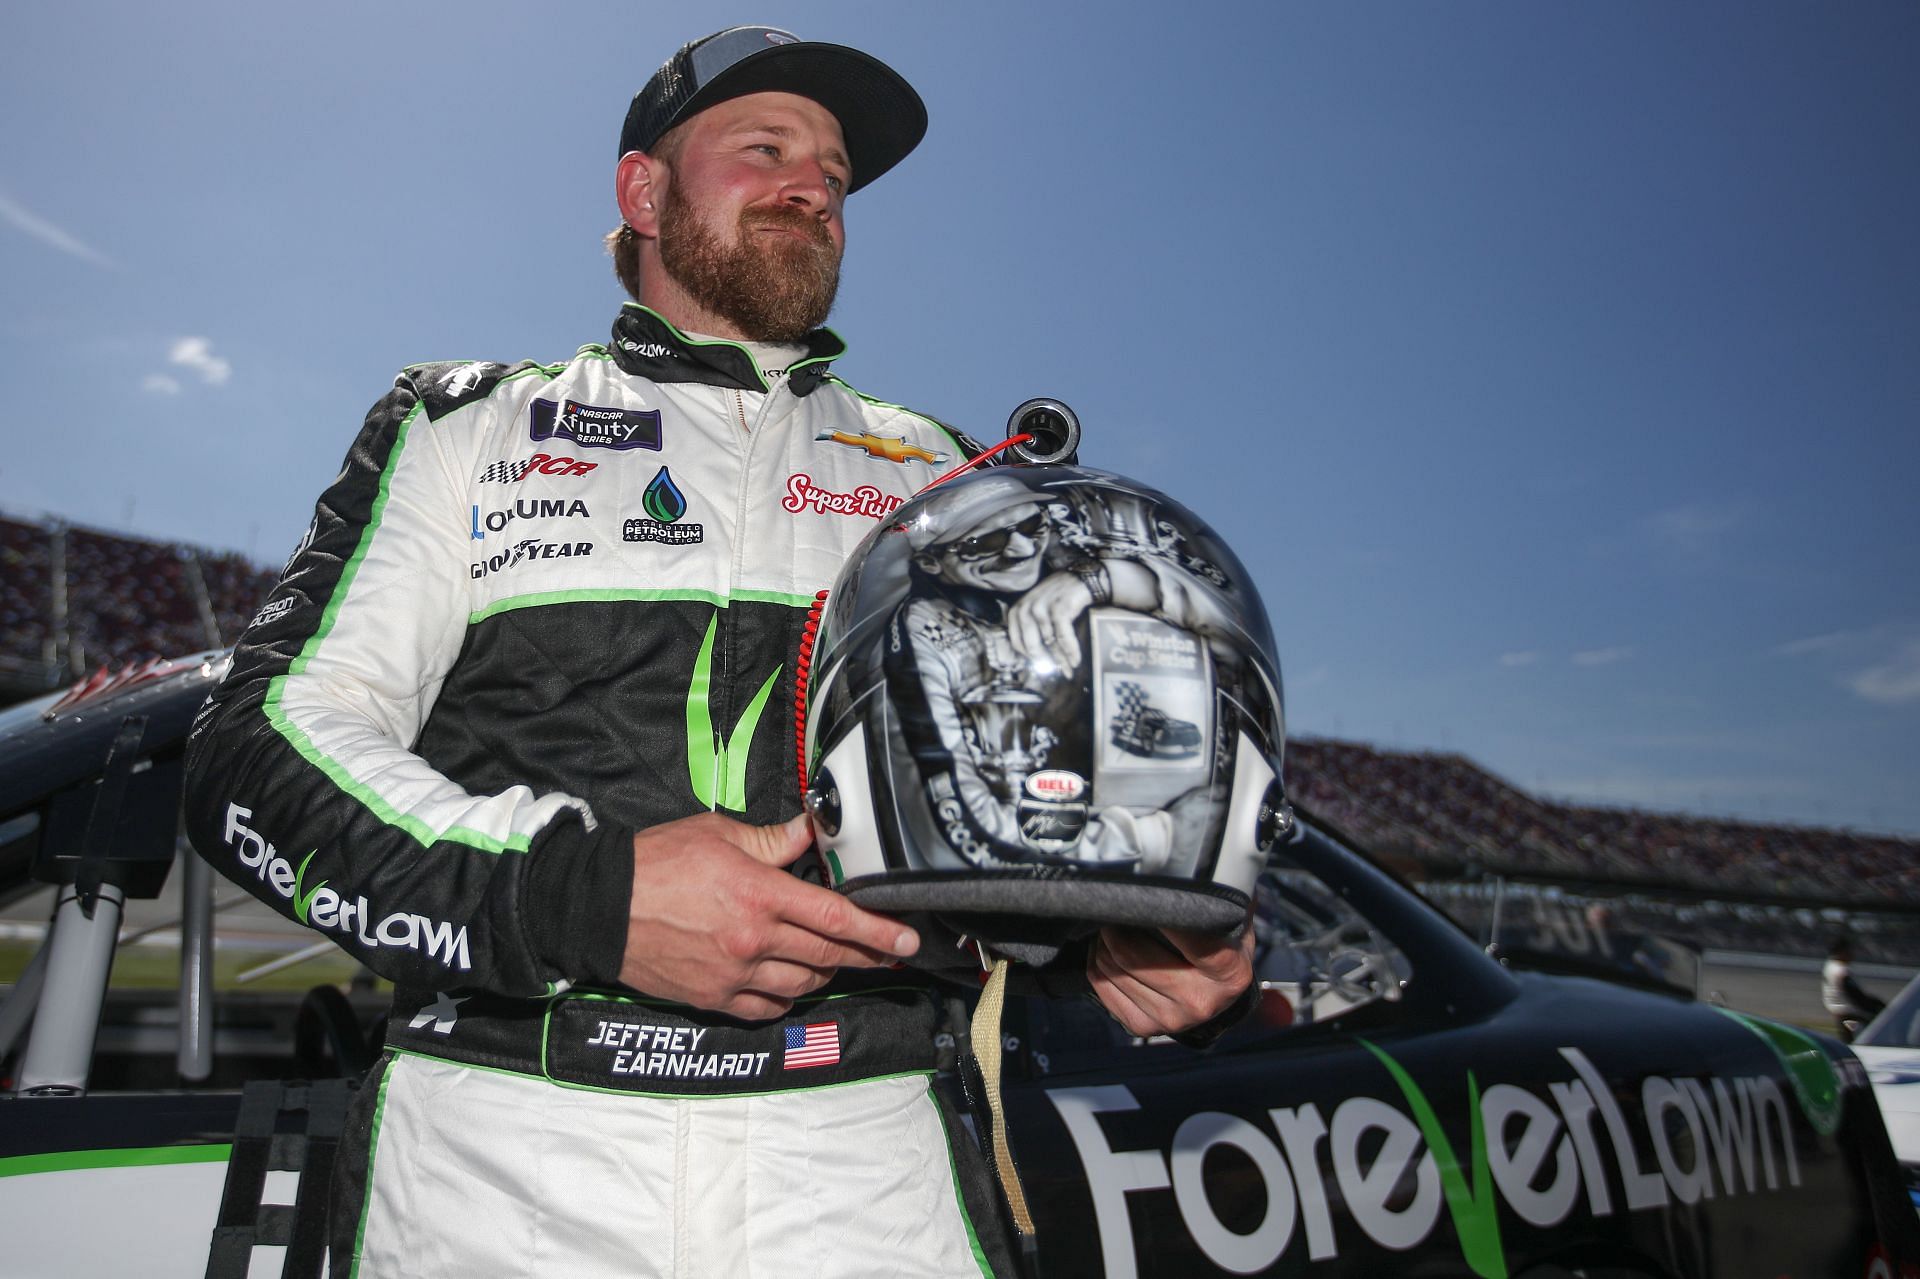 Jeffrey Earnhardt displaying his helmet with an artist rendering of his grandfather Dale Earnhardt Sr. on the grid prior to the NASCAR Xfinity Series Ag-Pro 300 at Talladega Superspeedway.